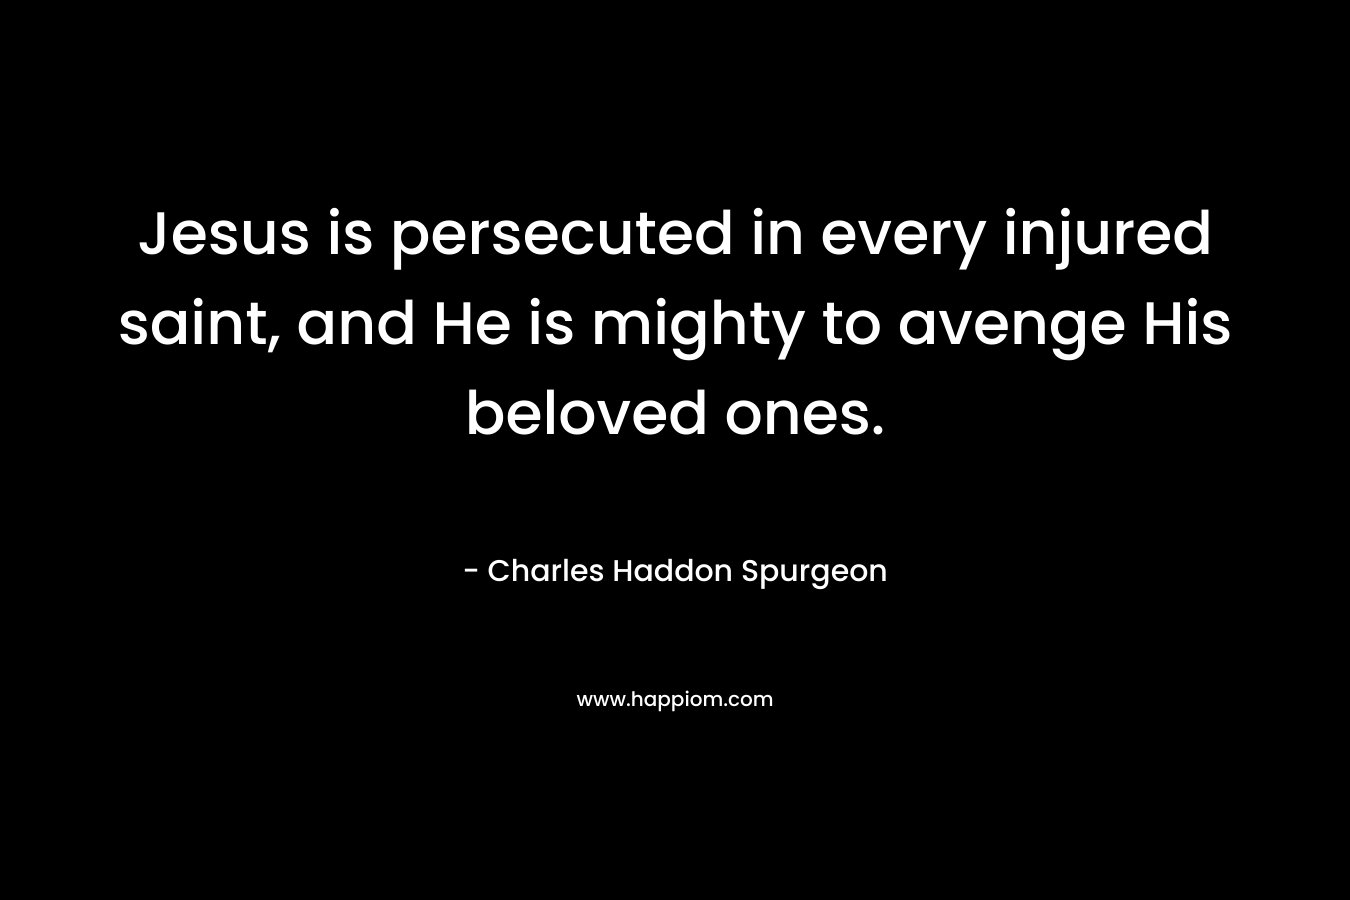 Jesus is persecuted in every injured saint, and He is mighty to avenge His beloved ones. – Charles Haddon Spurgeon